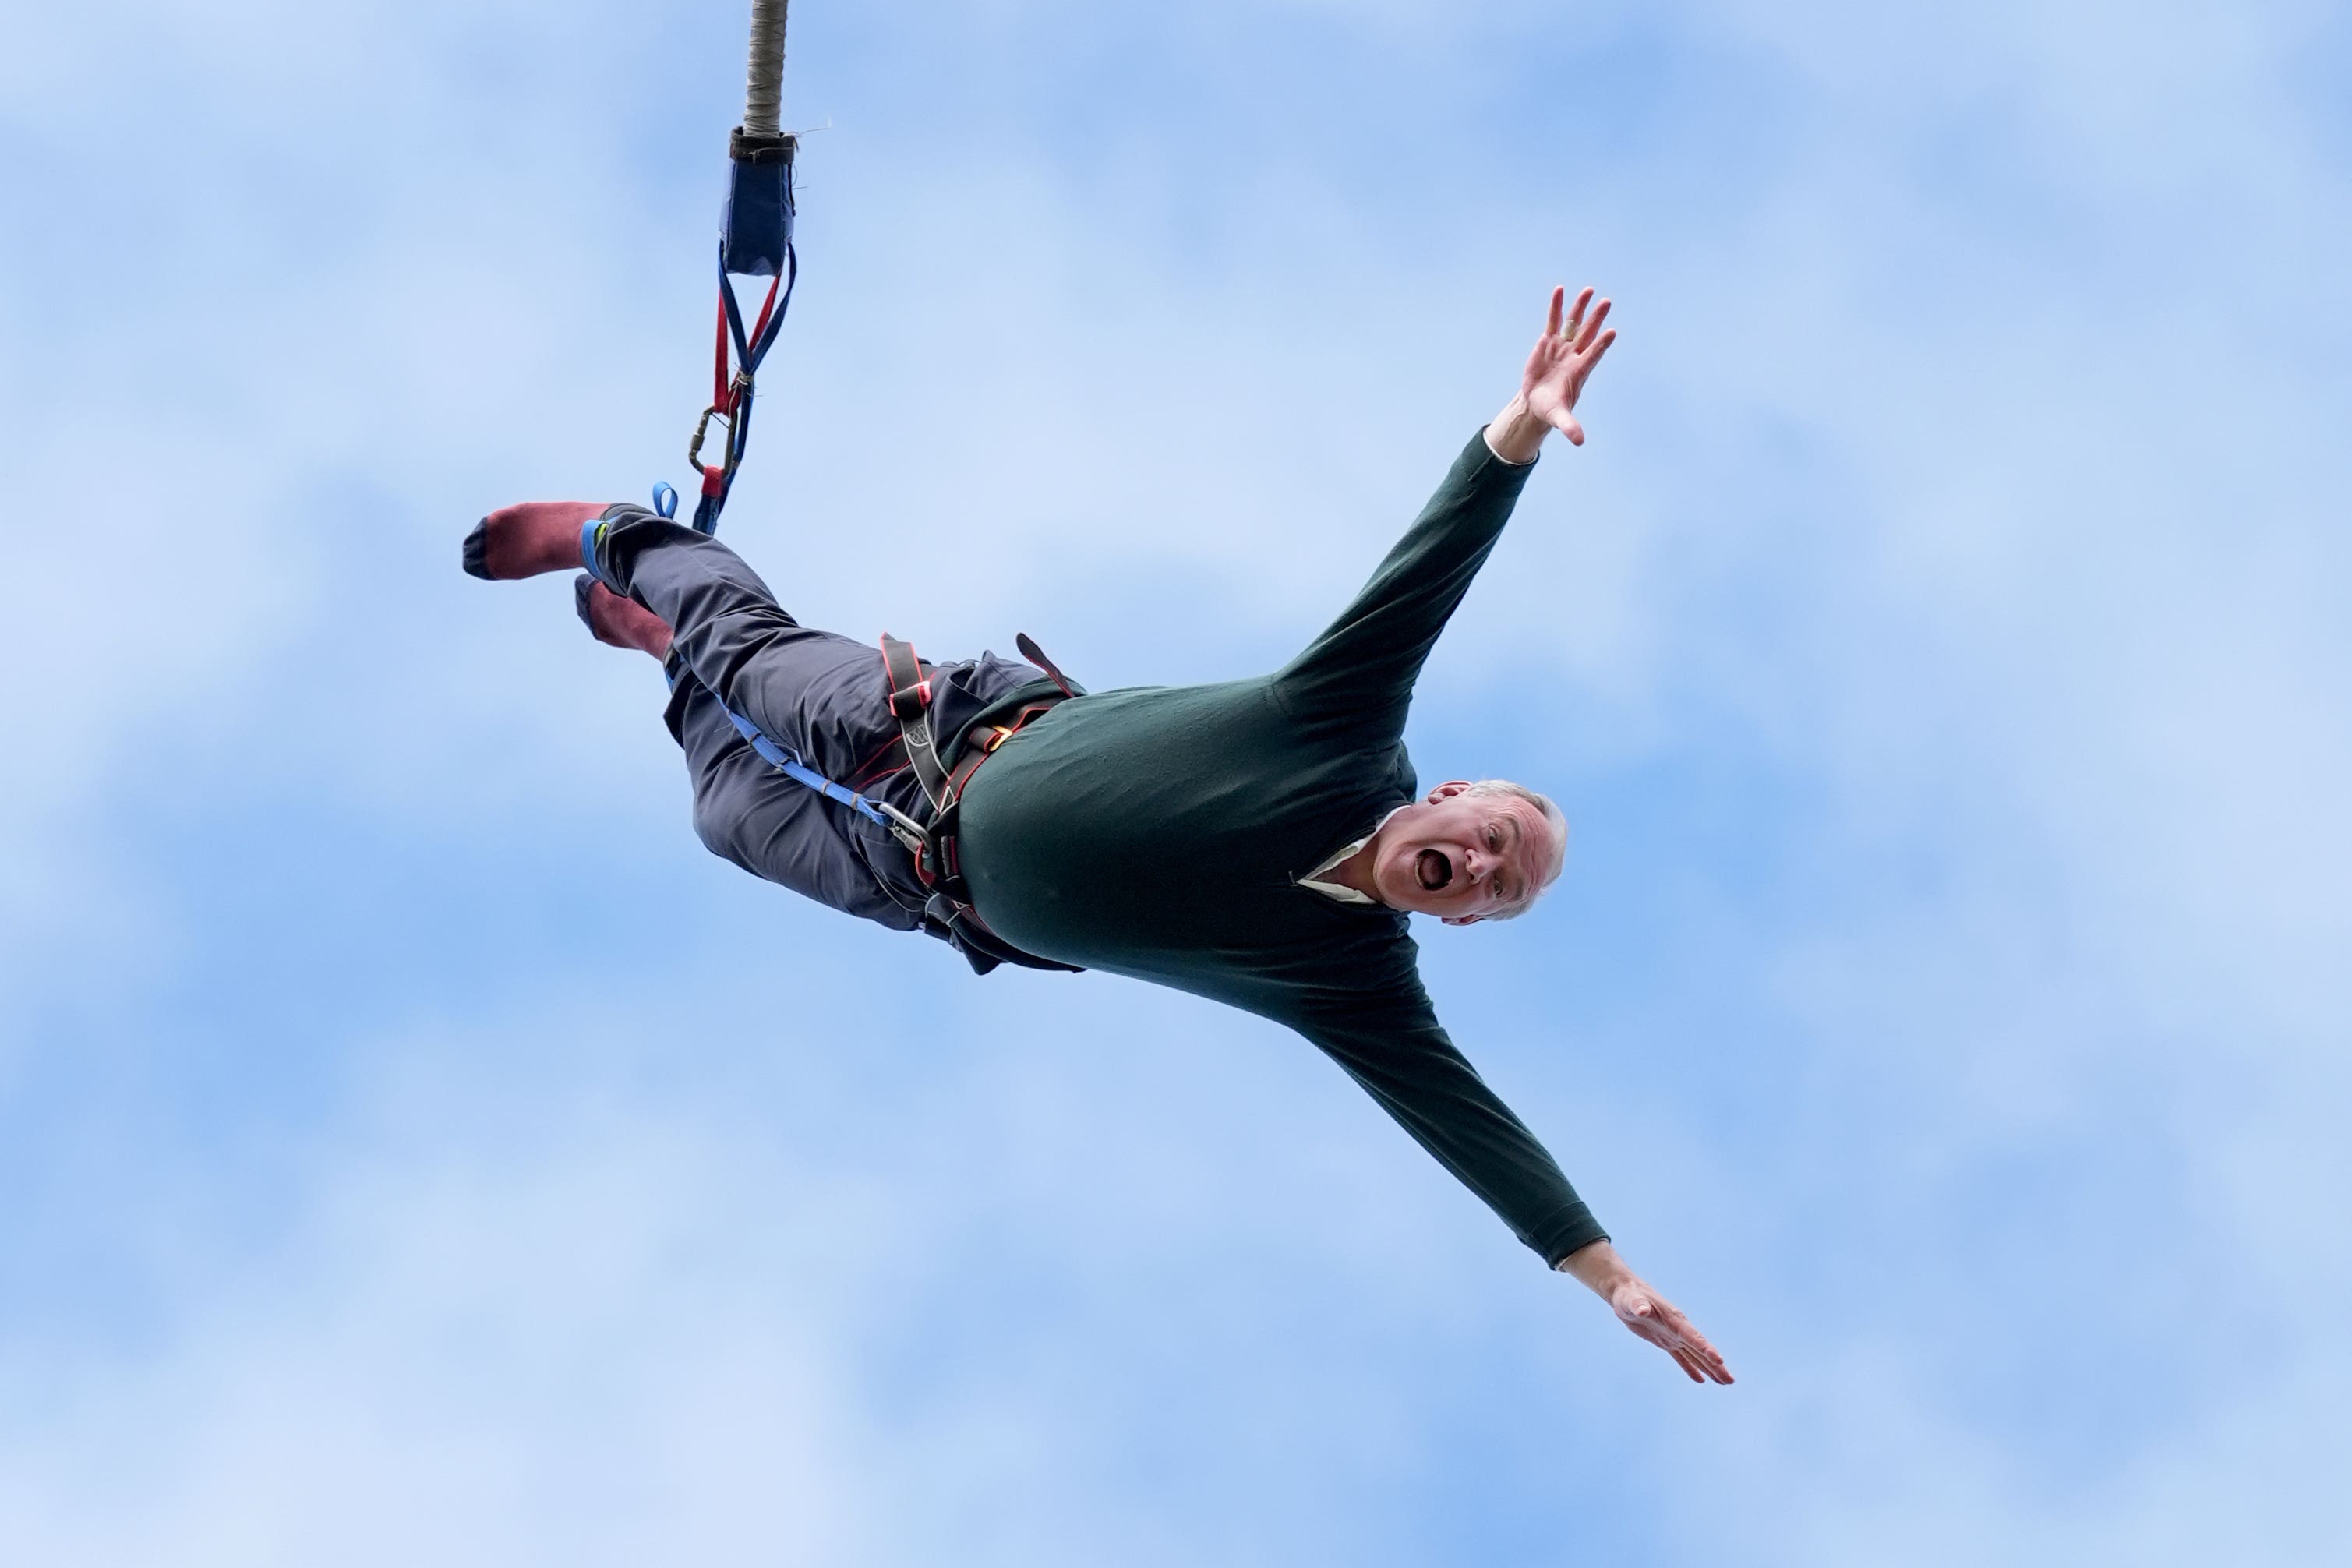 Liberal Democrat leader Ed Davey taking part in a bungee jump